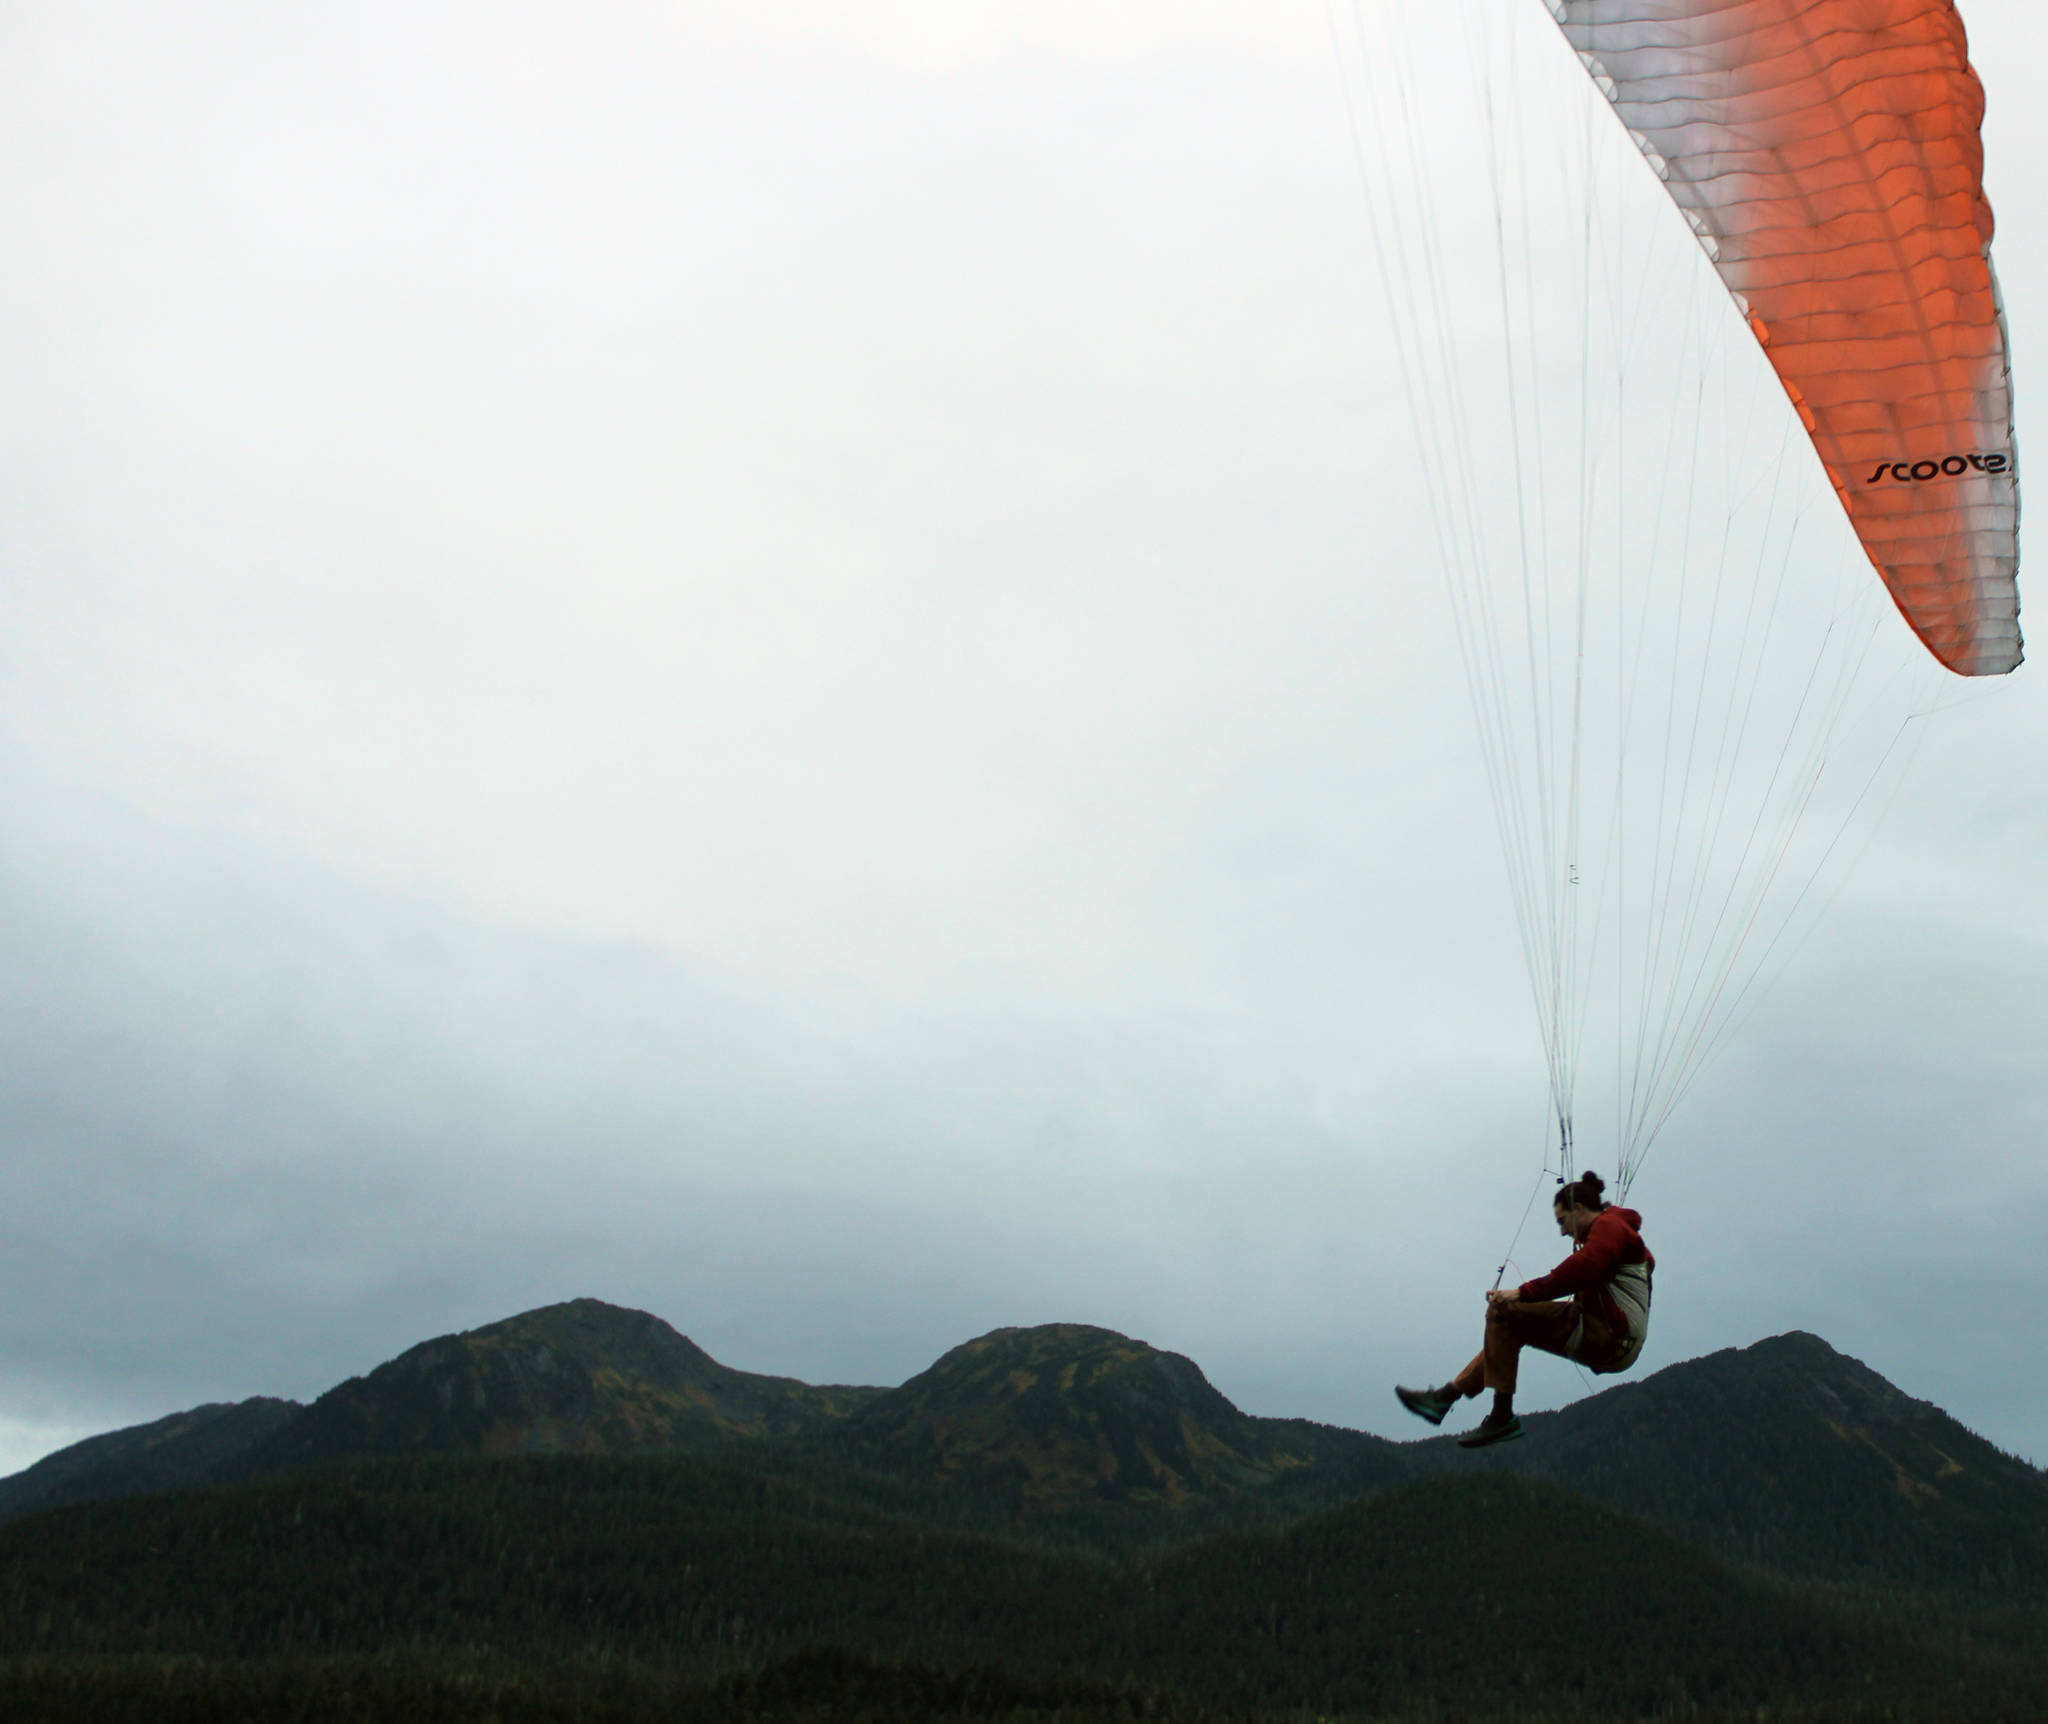 Greg Kopache said he often paraglides near Mount Roberts, but on Tuesday, Sept. 22, 2020, he was one half of a pair of gliders floating along Channel Drive. (Ben Hohenstatt / Juneau Empire)